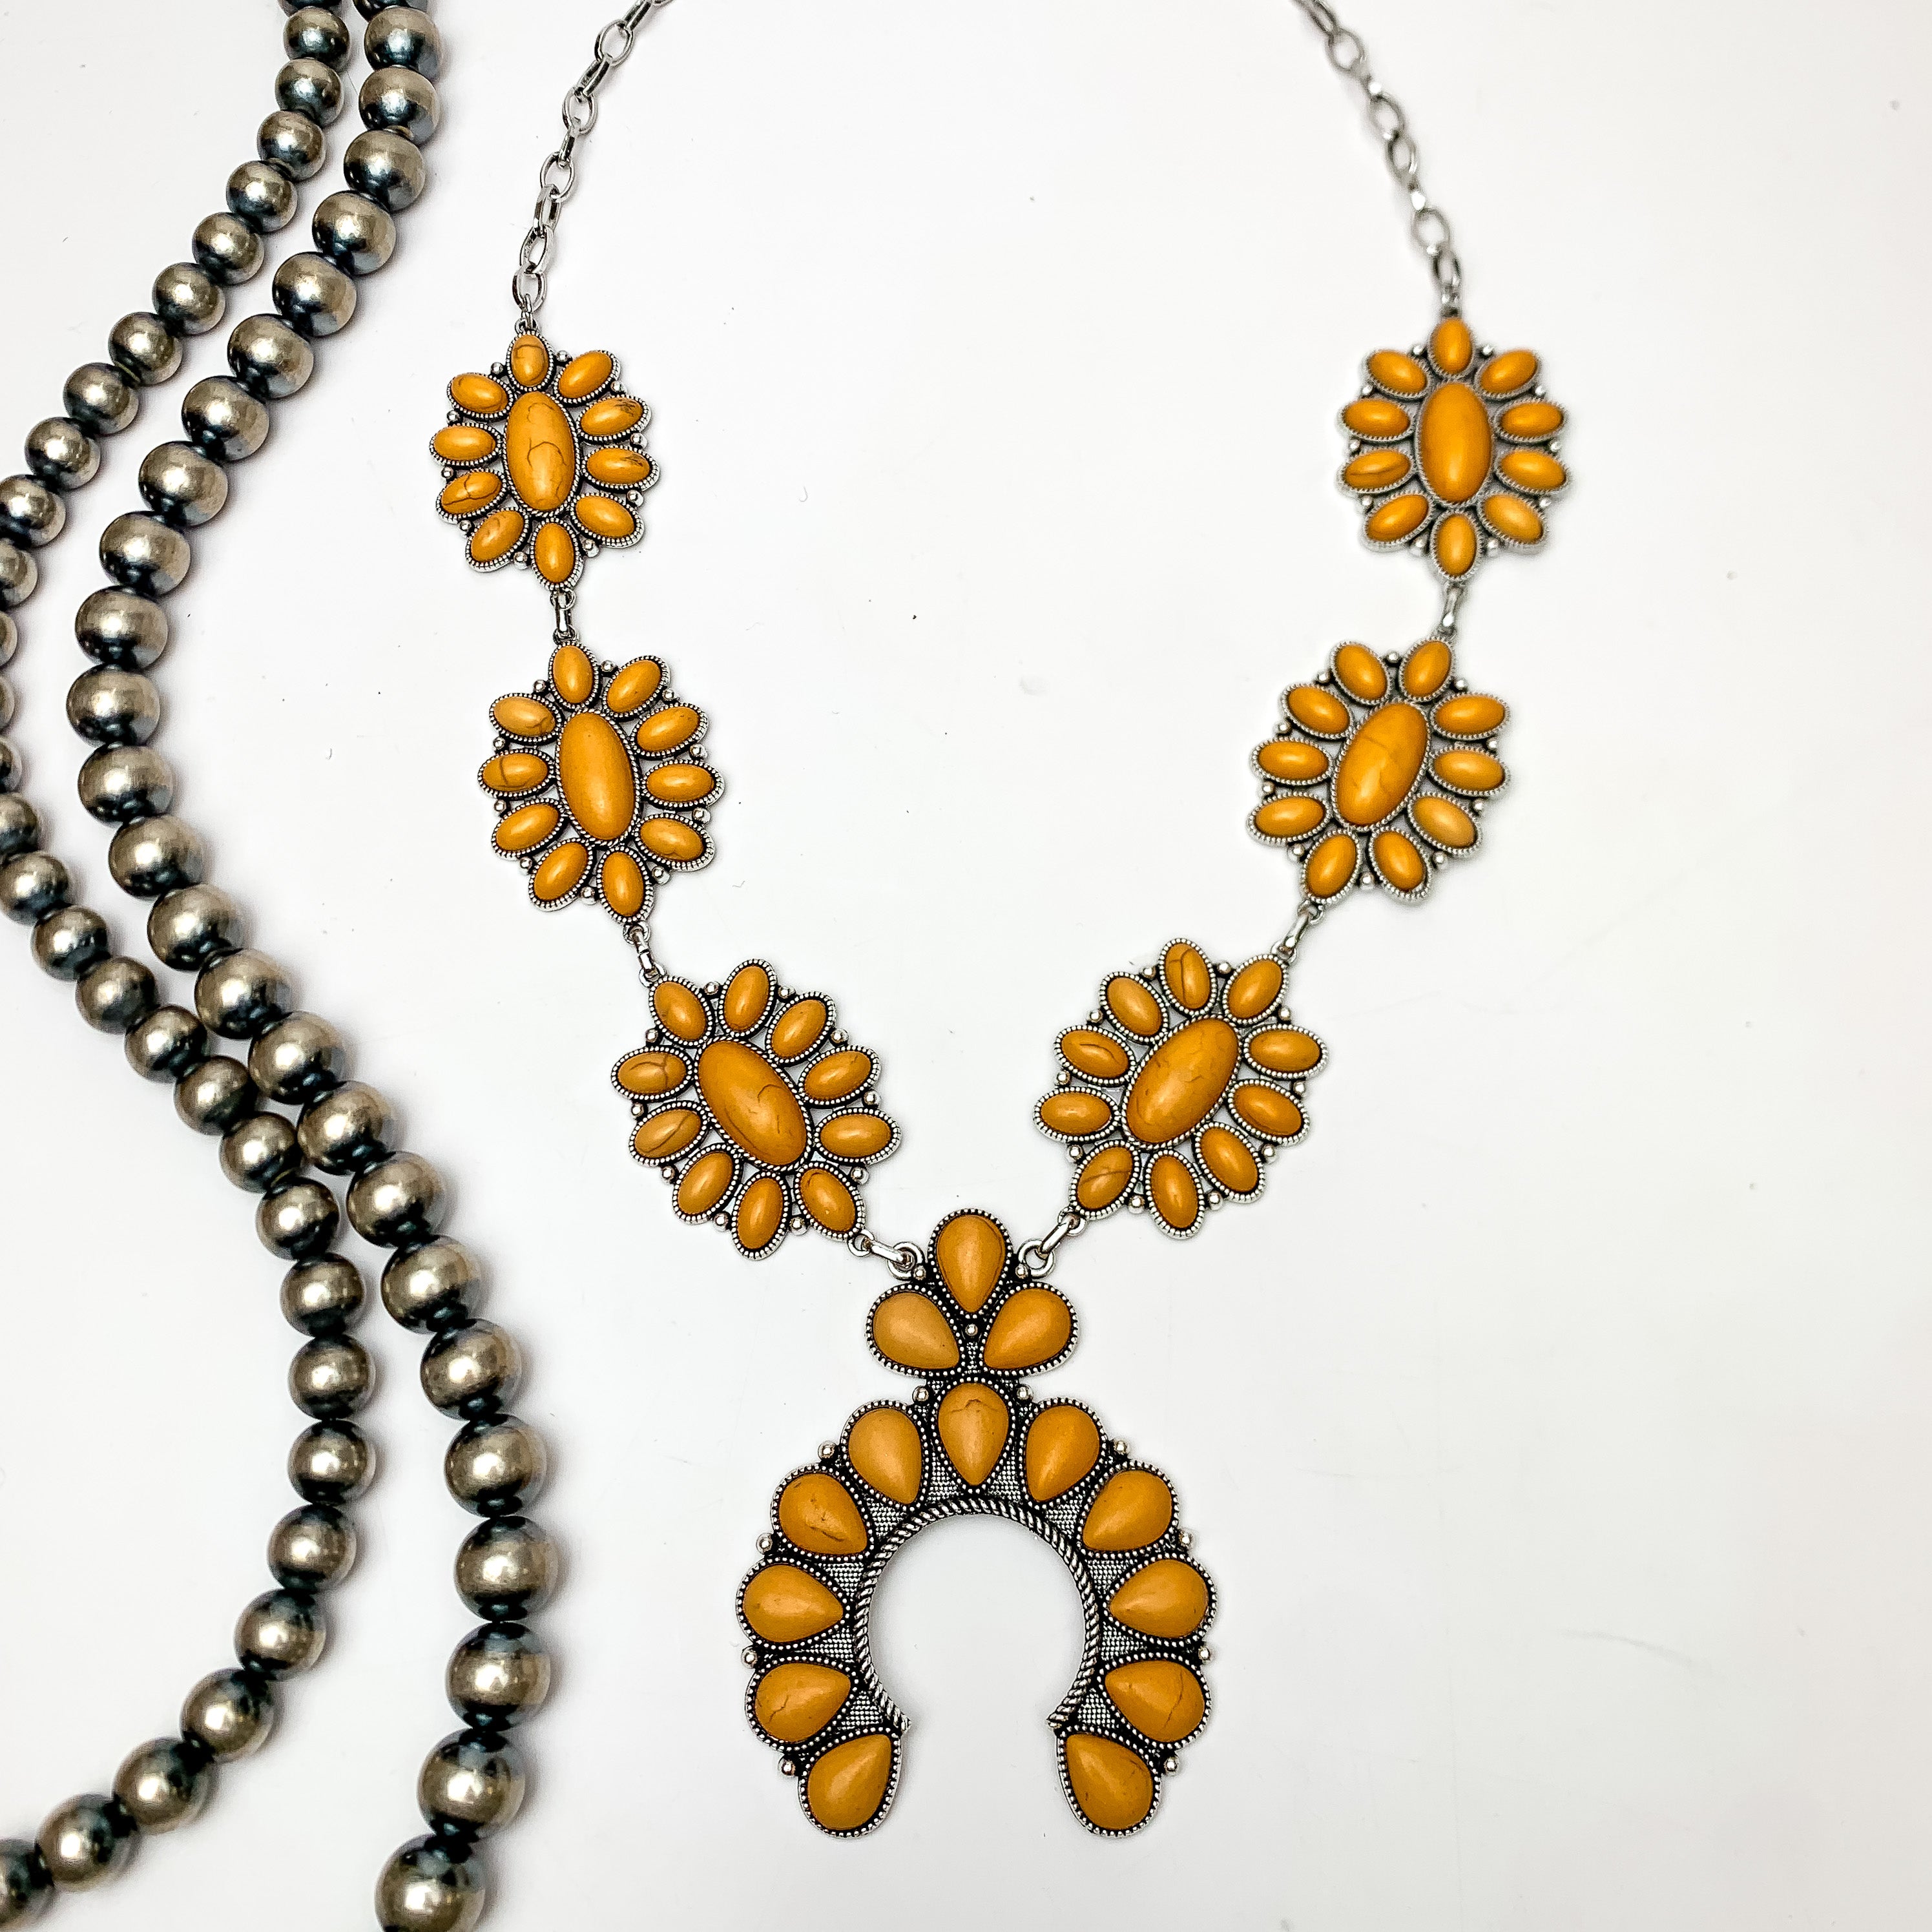 Squash Necklace with Oval Flowers in Silver Tone and yellow. This necklace is pictured on a white background with Navajo pearls on the left side.